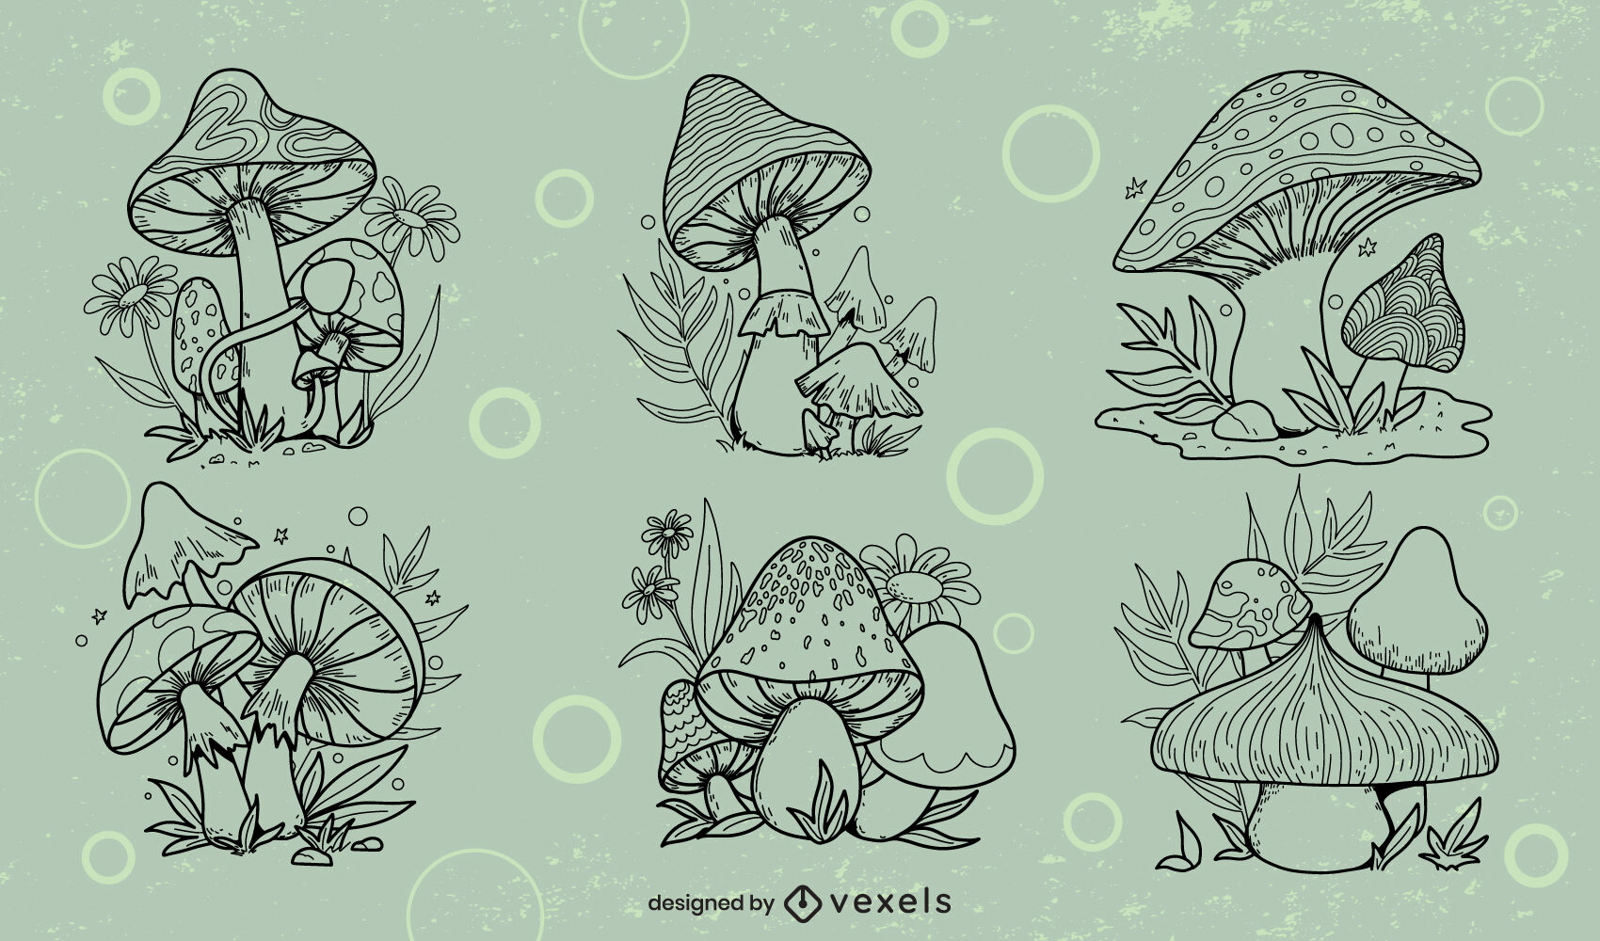 Mushroom sprouts in nature line art style